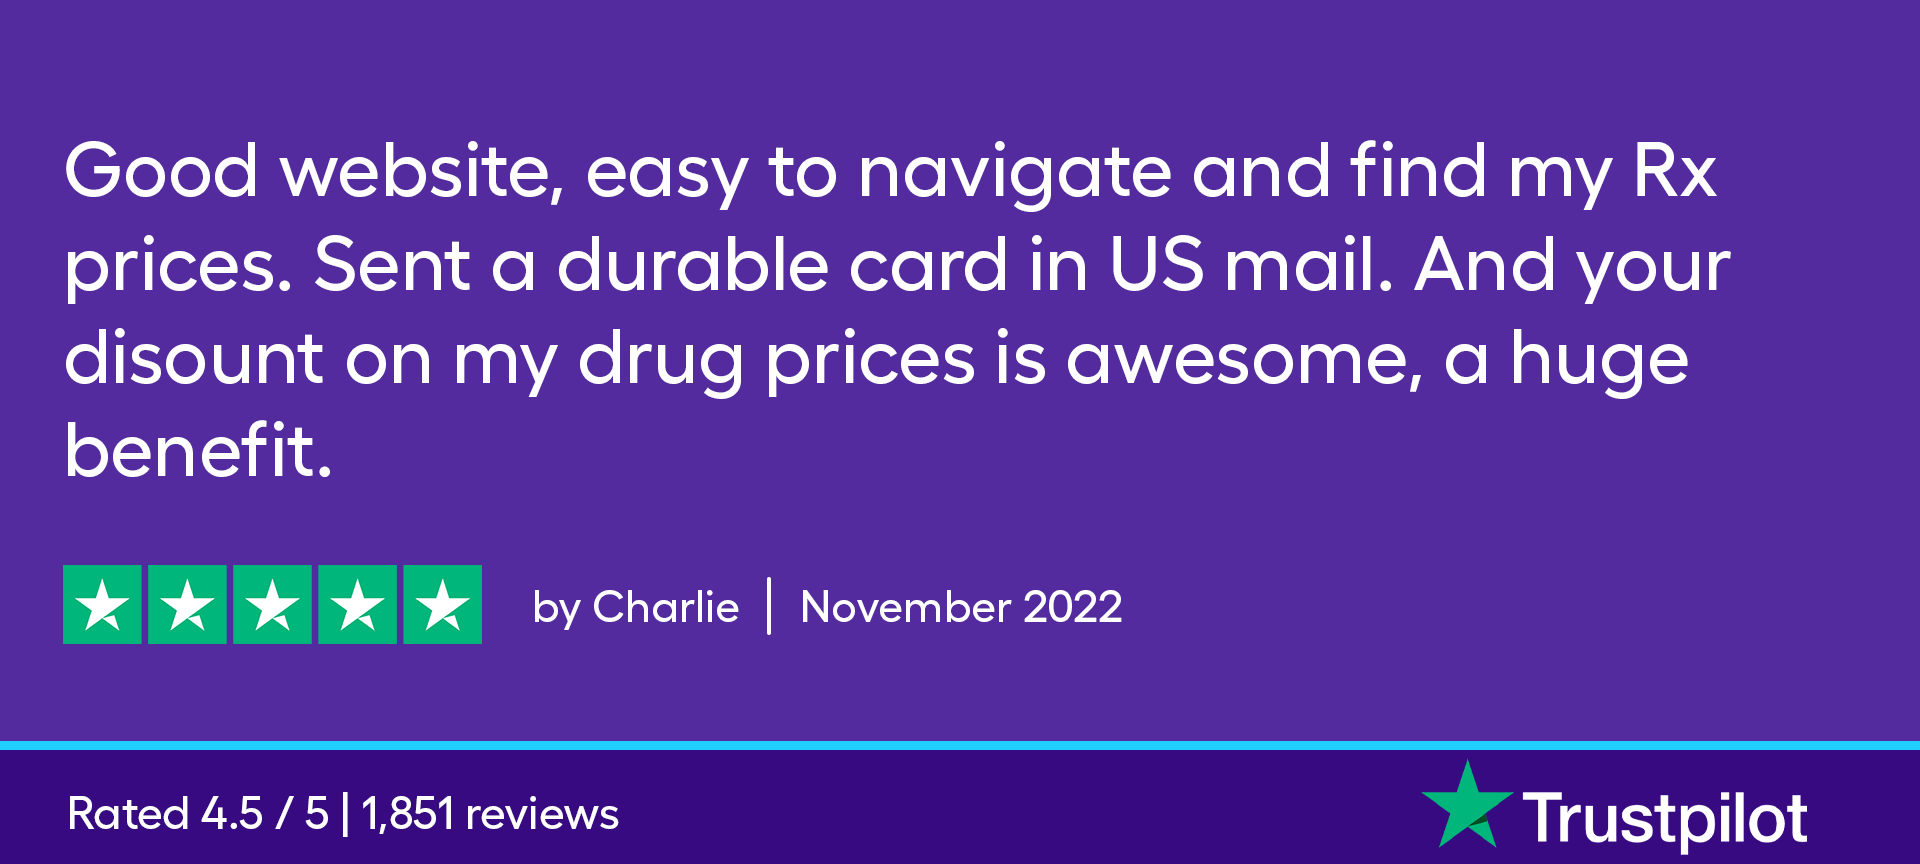 Good website, easy to navigate and find my flu prices. Sent a durable card in US mail. And your discount on my drug prices is awesome, a huge benefit.